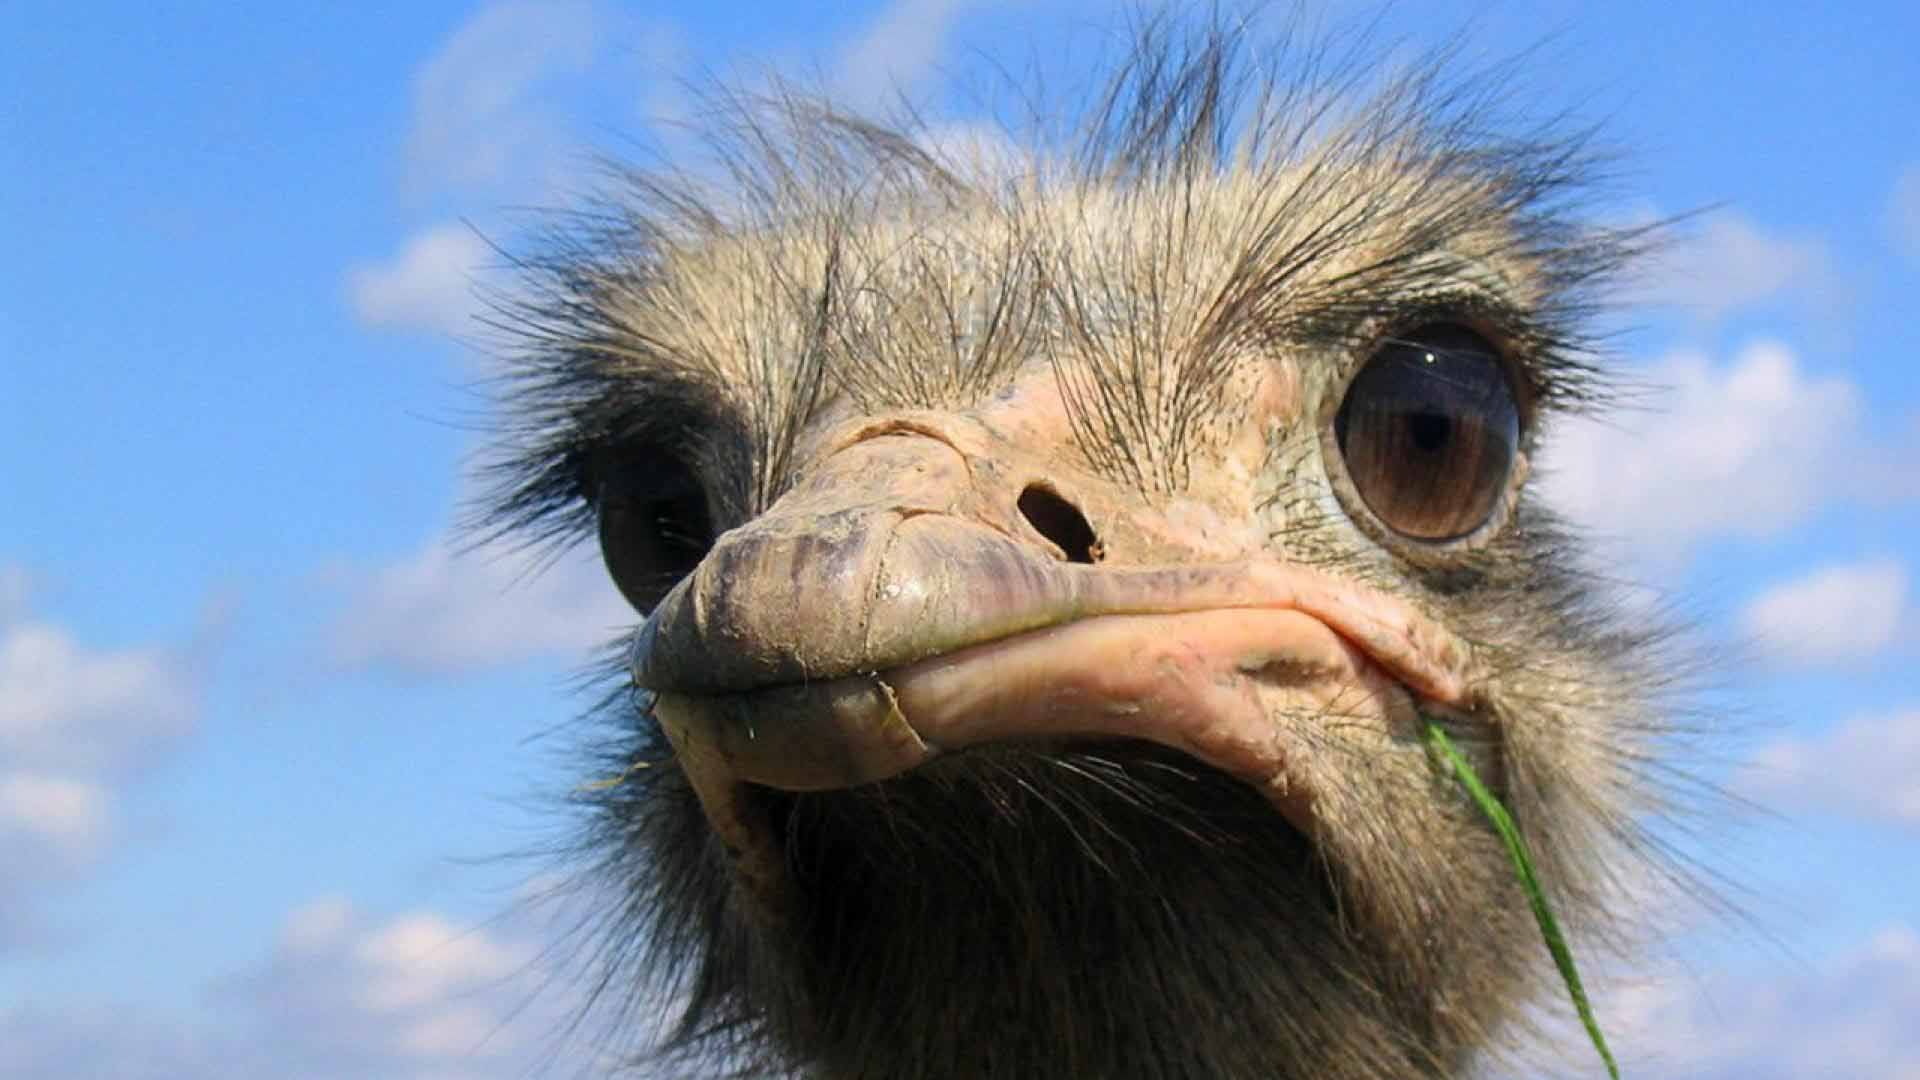 Ostrich Latest HD Wallpaper Free Download. Animal facts